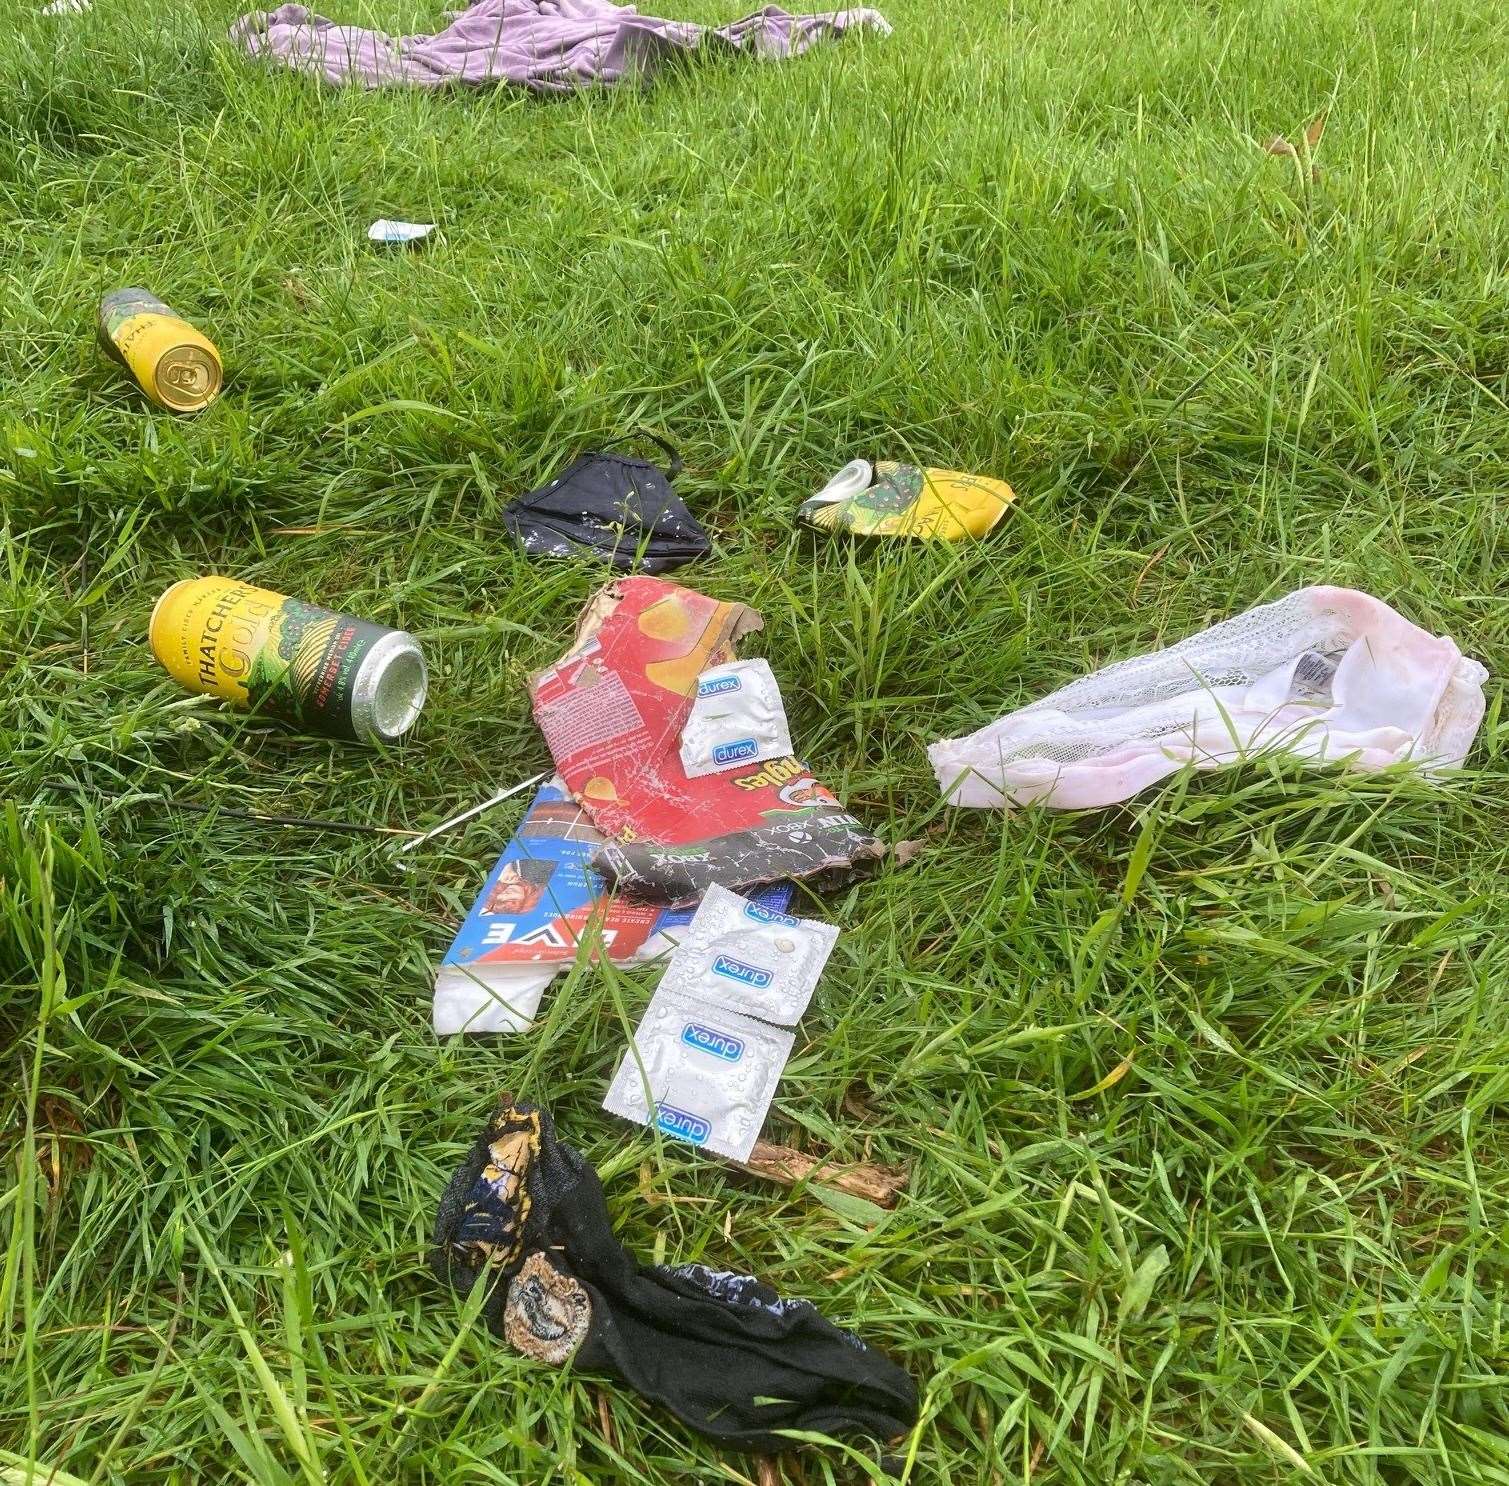 Ladies underwear, condoms and booze left at Gorrell Valley Nature Reserve in Whitstable. Picture: Ashley Clark